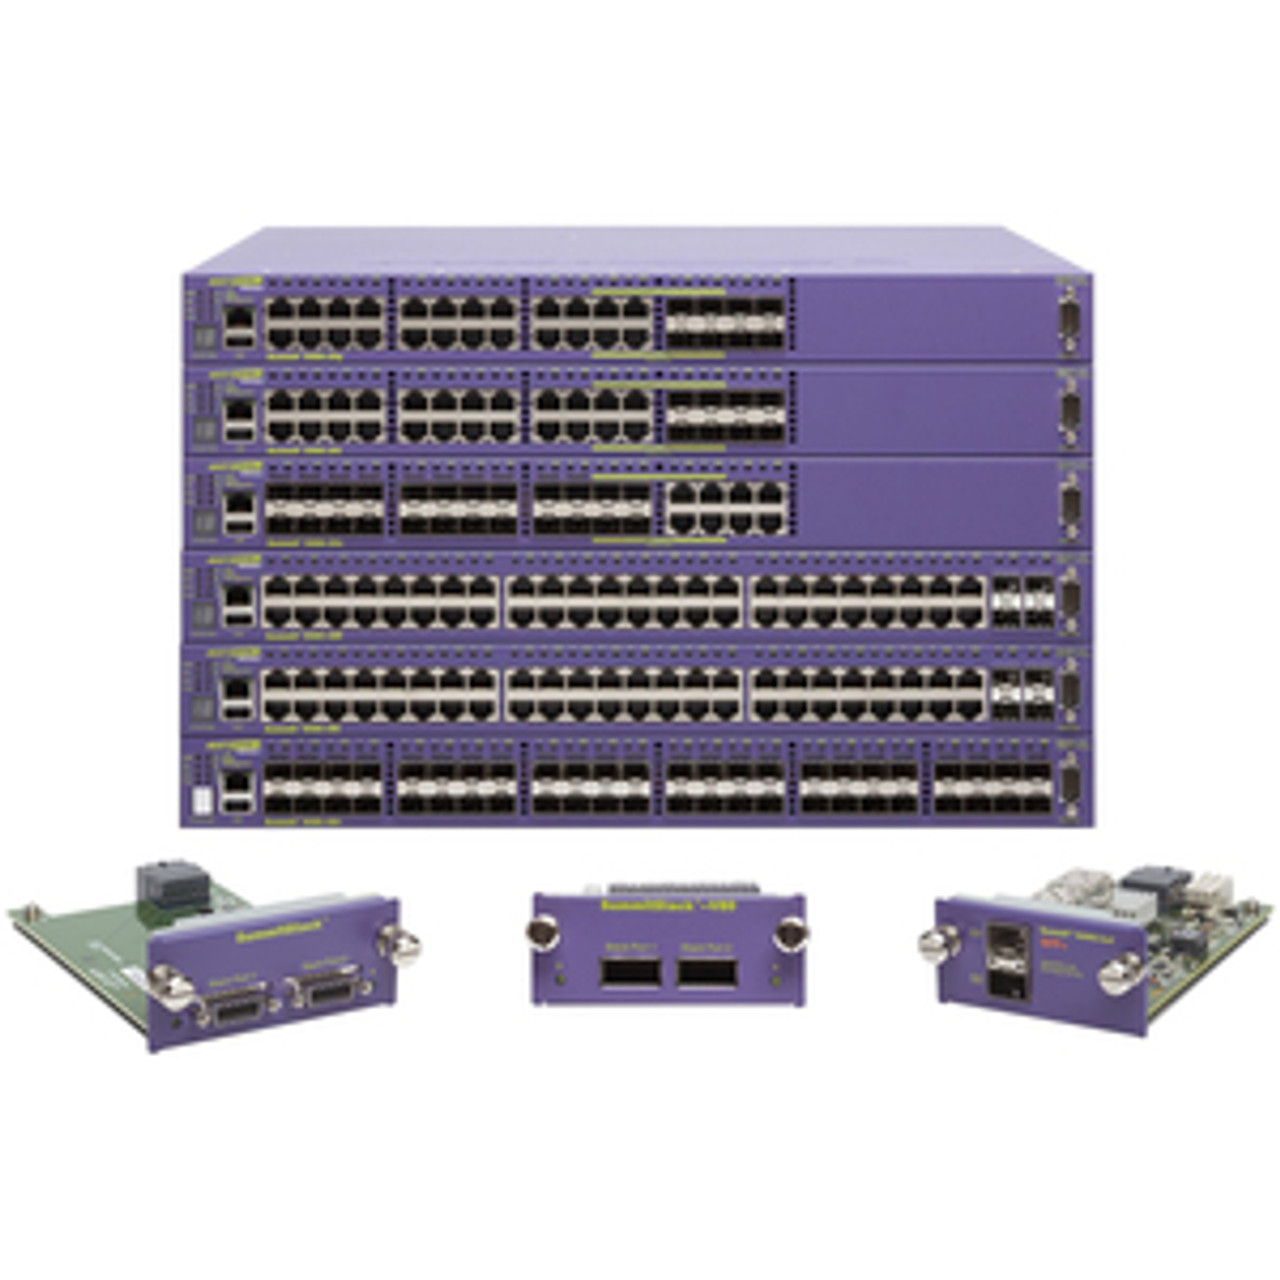 16406 Extreme Networks Summit X460-48x Layer 3 Switch - Manageable - Gigabit Ethernet - 1000Base-T - 3 Layer Supported - 48 SFP Slots - Power Supply -